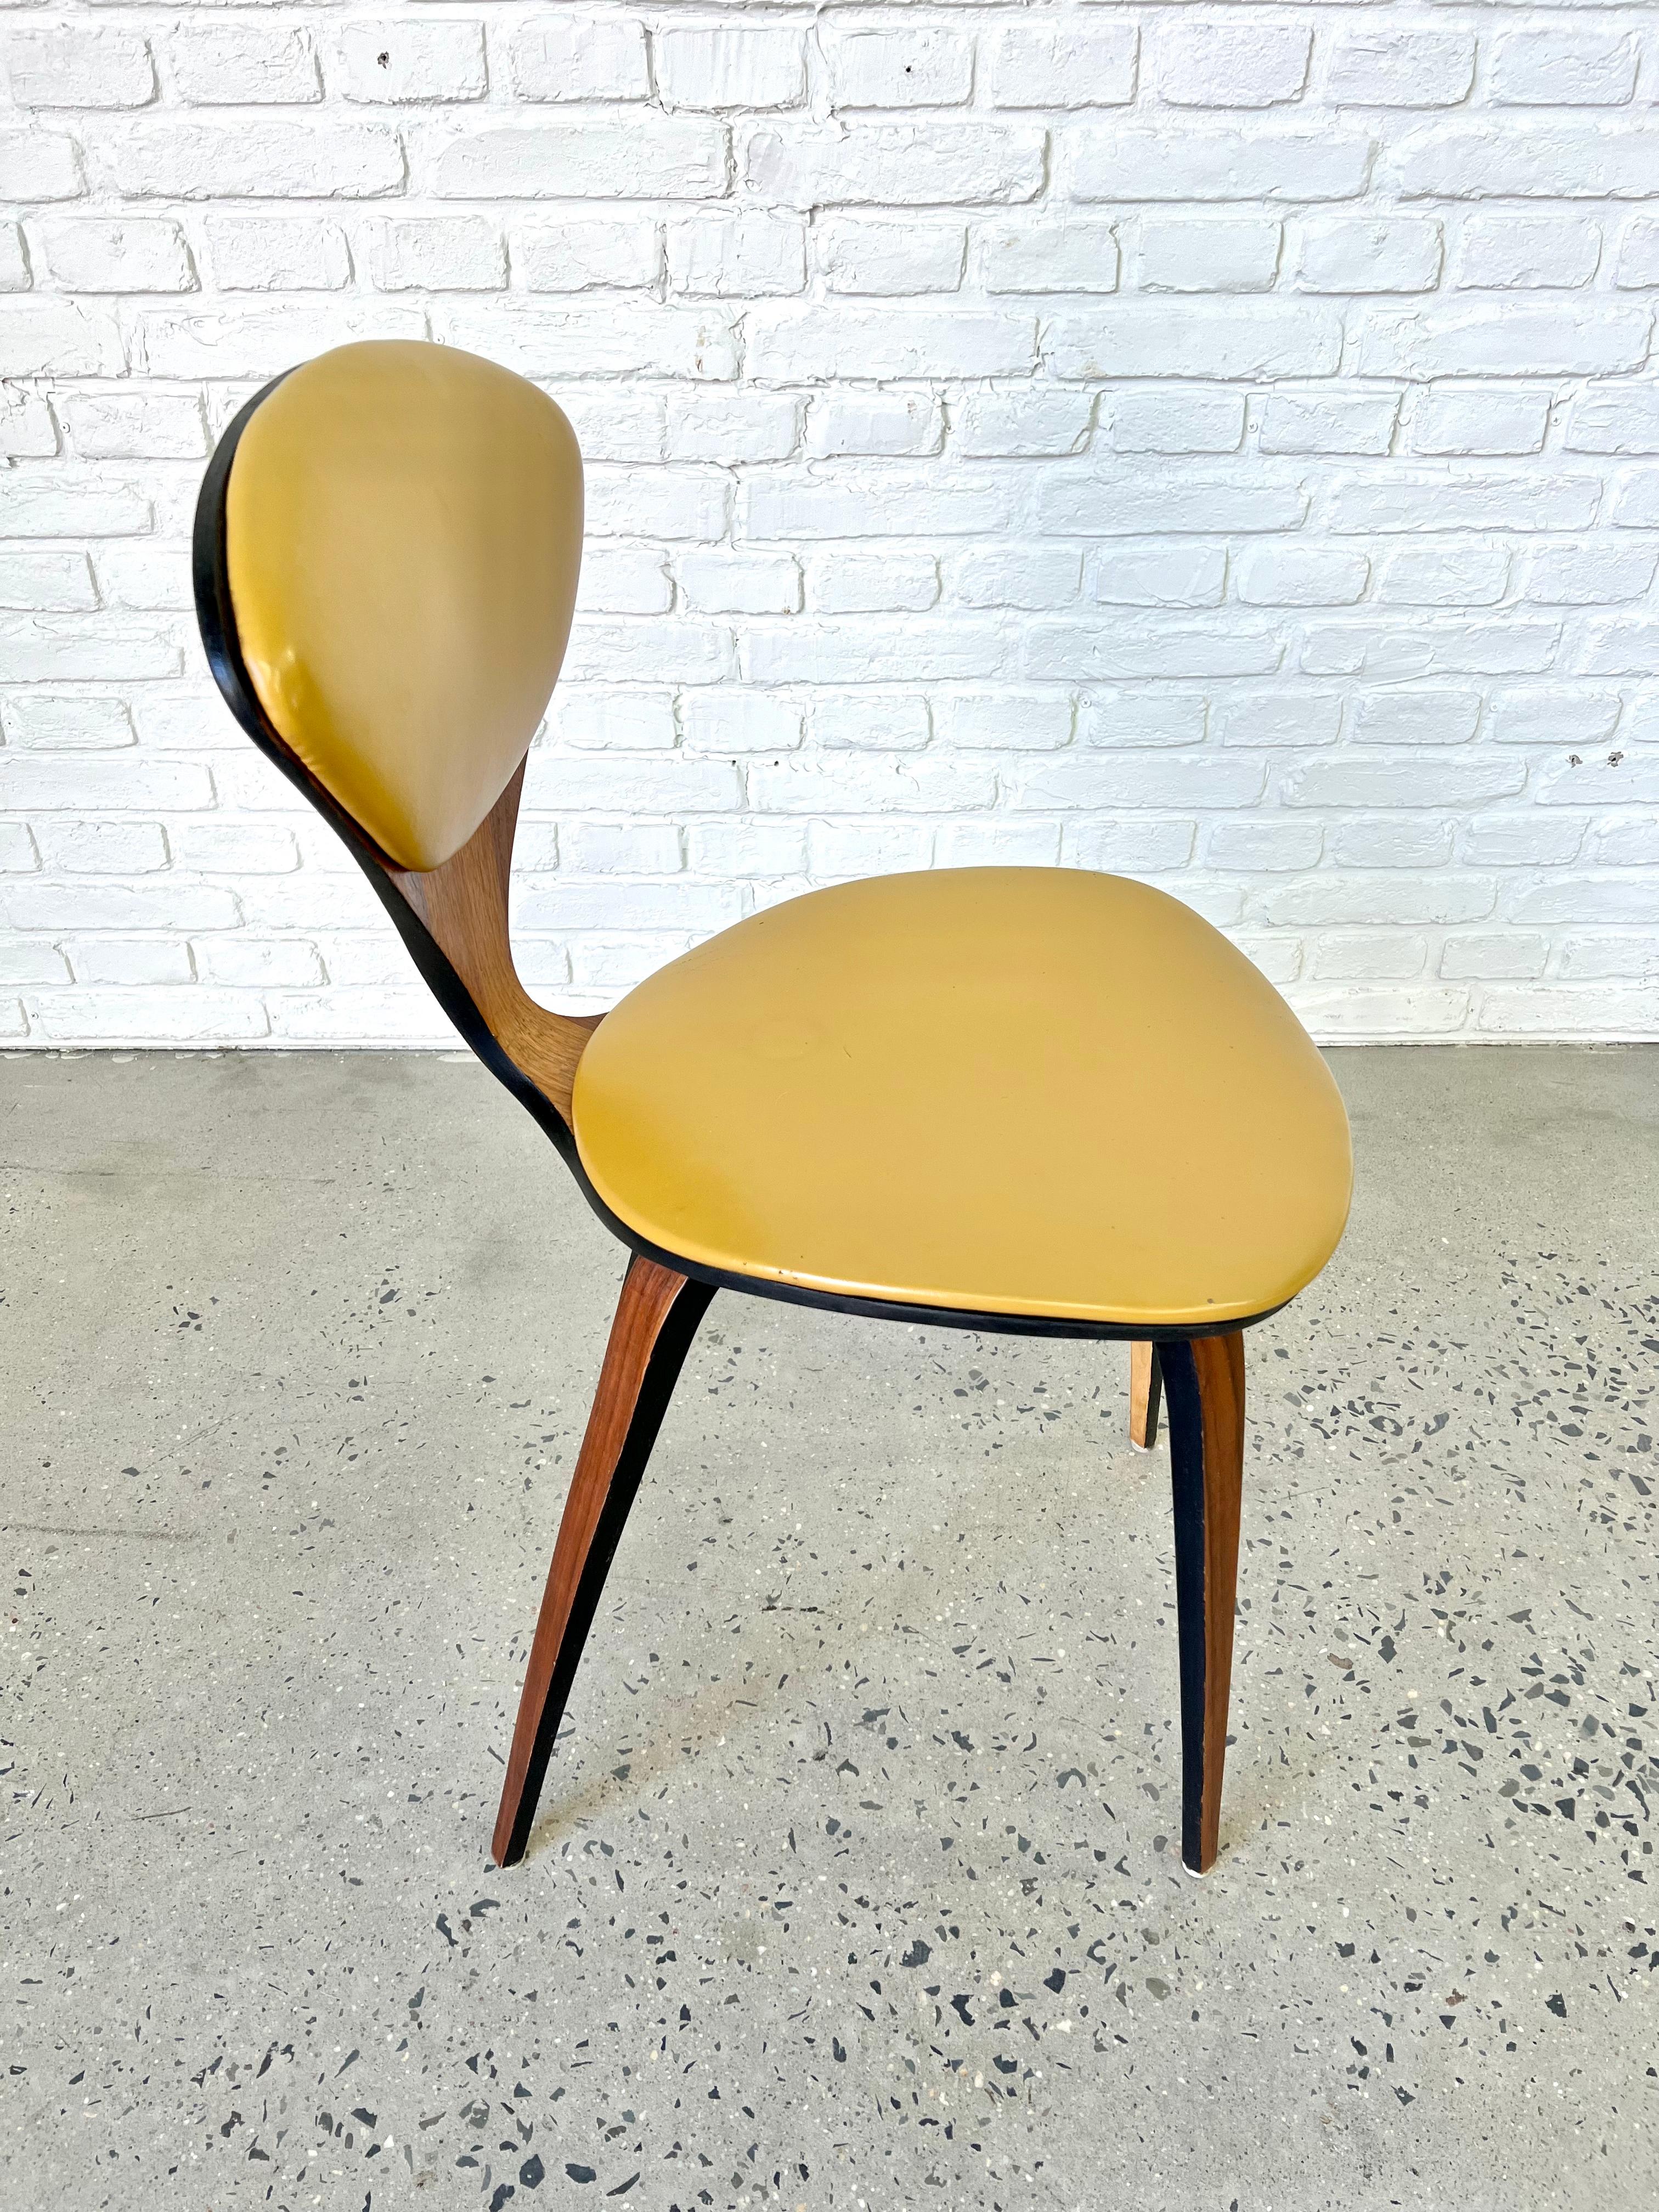 Norman Cherner for Plycraft Bentwood chair with Yellow Vinyl cushion 1960s In Good Condition For Sale In Ocean Grove, NJ